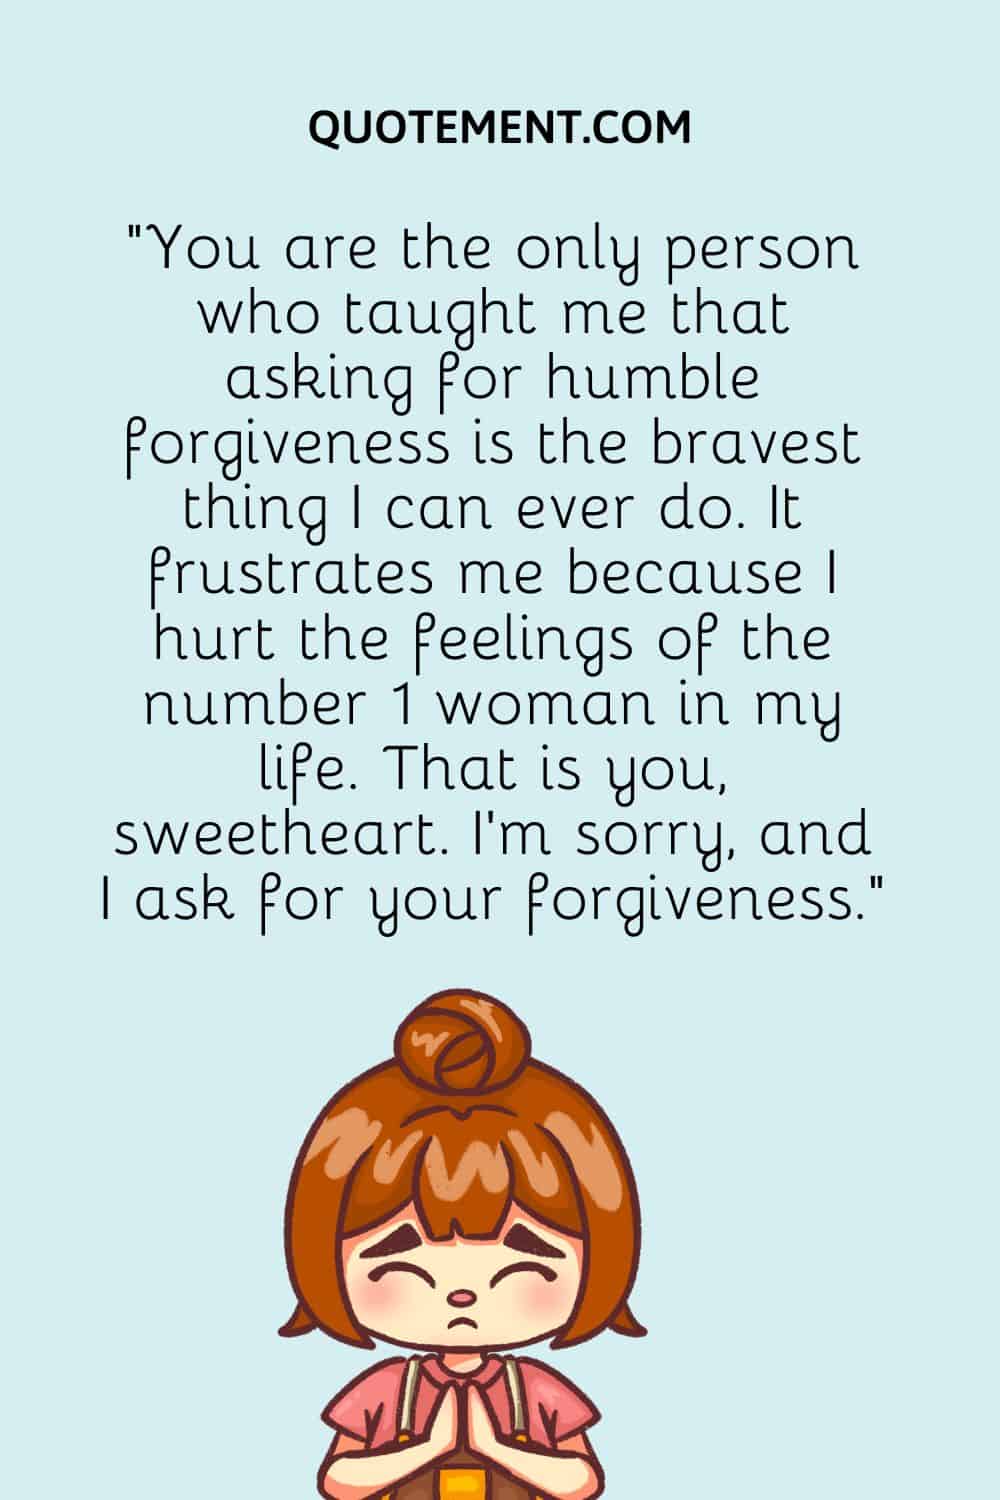 You are the only person who taught me that asking for humble forgiveness is the bravest thing I can ever do.